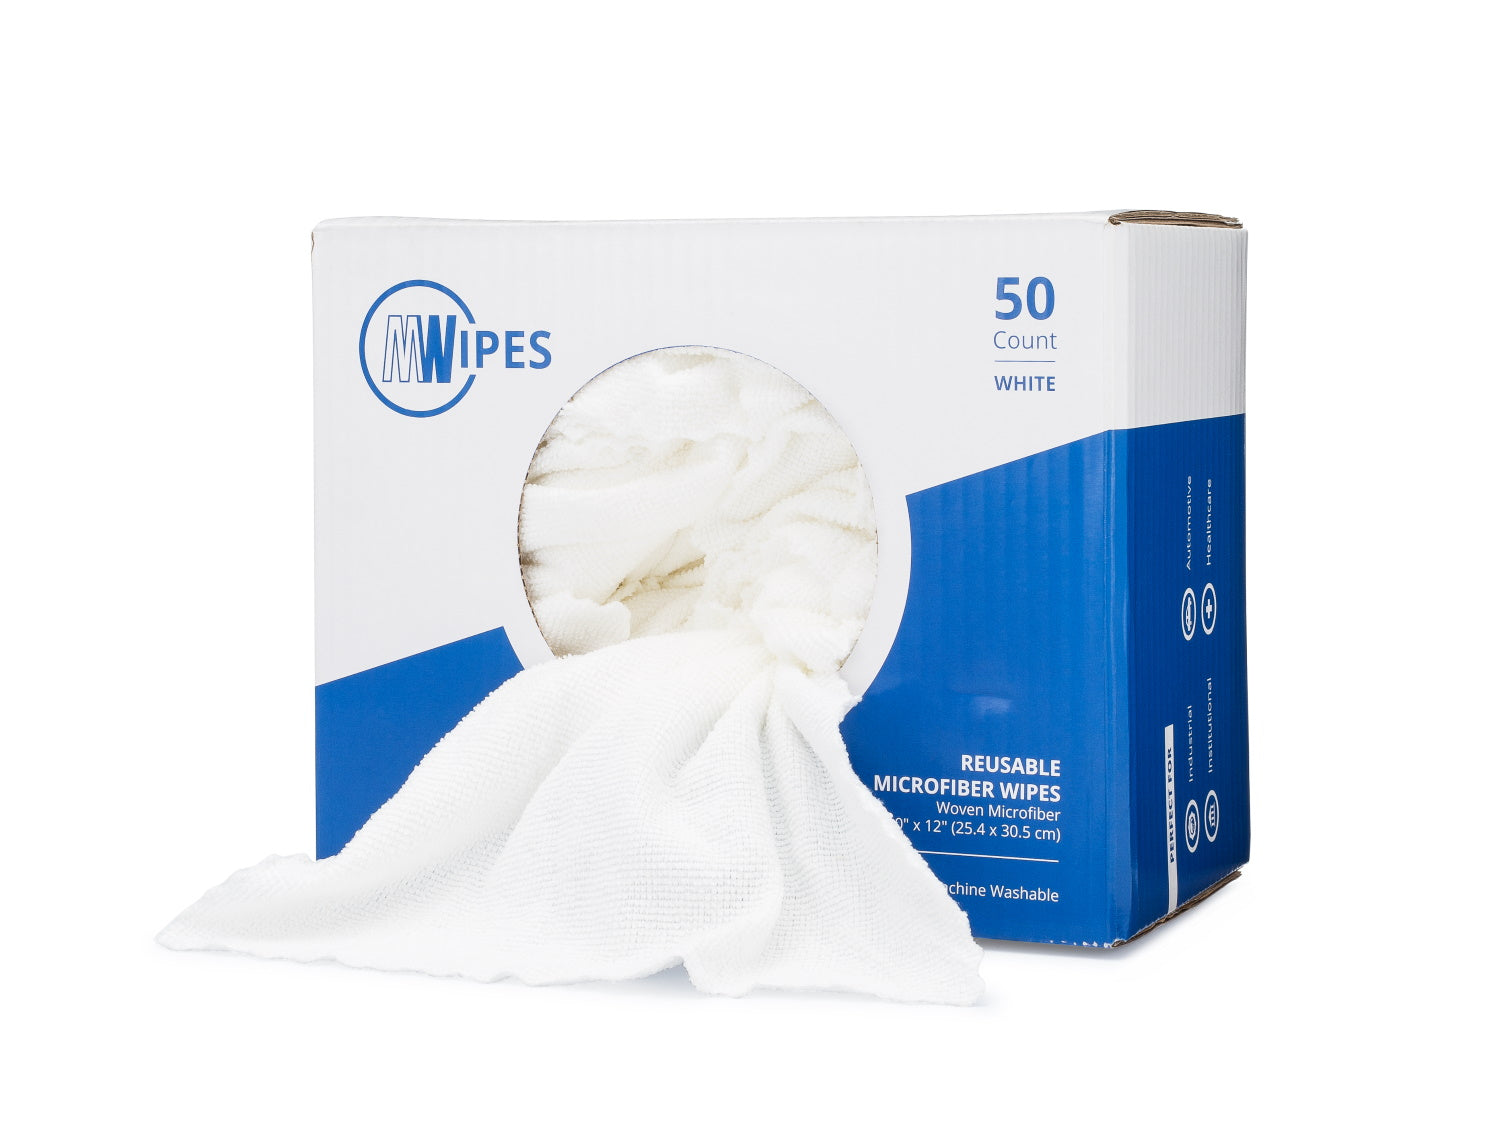 Zwipes Microfiber Cleaning Cloths, Assorted - 12 pack